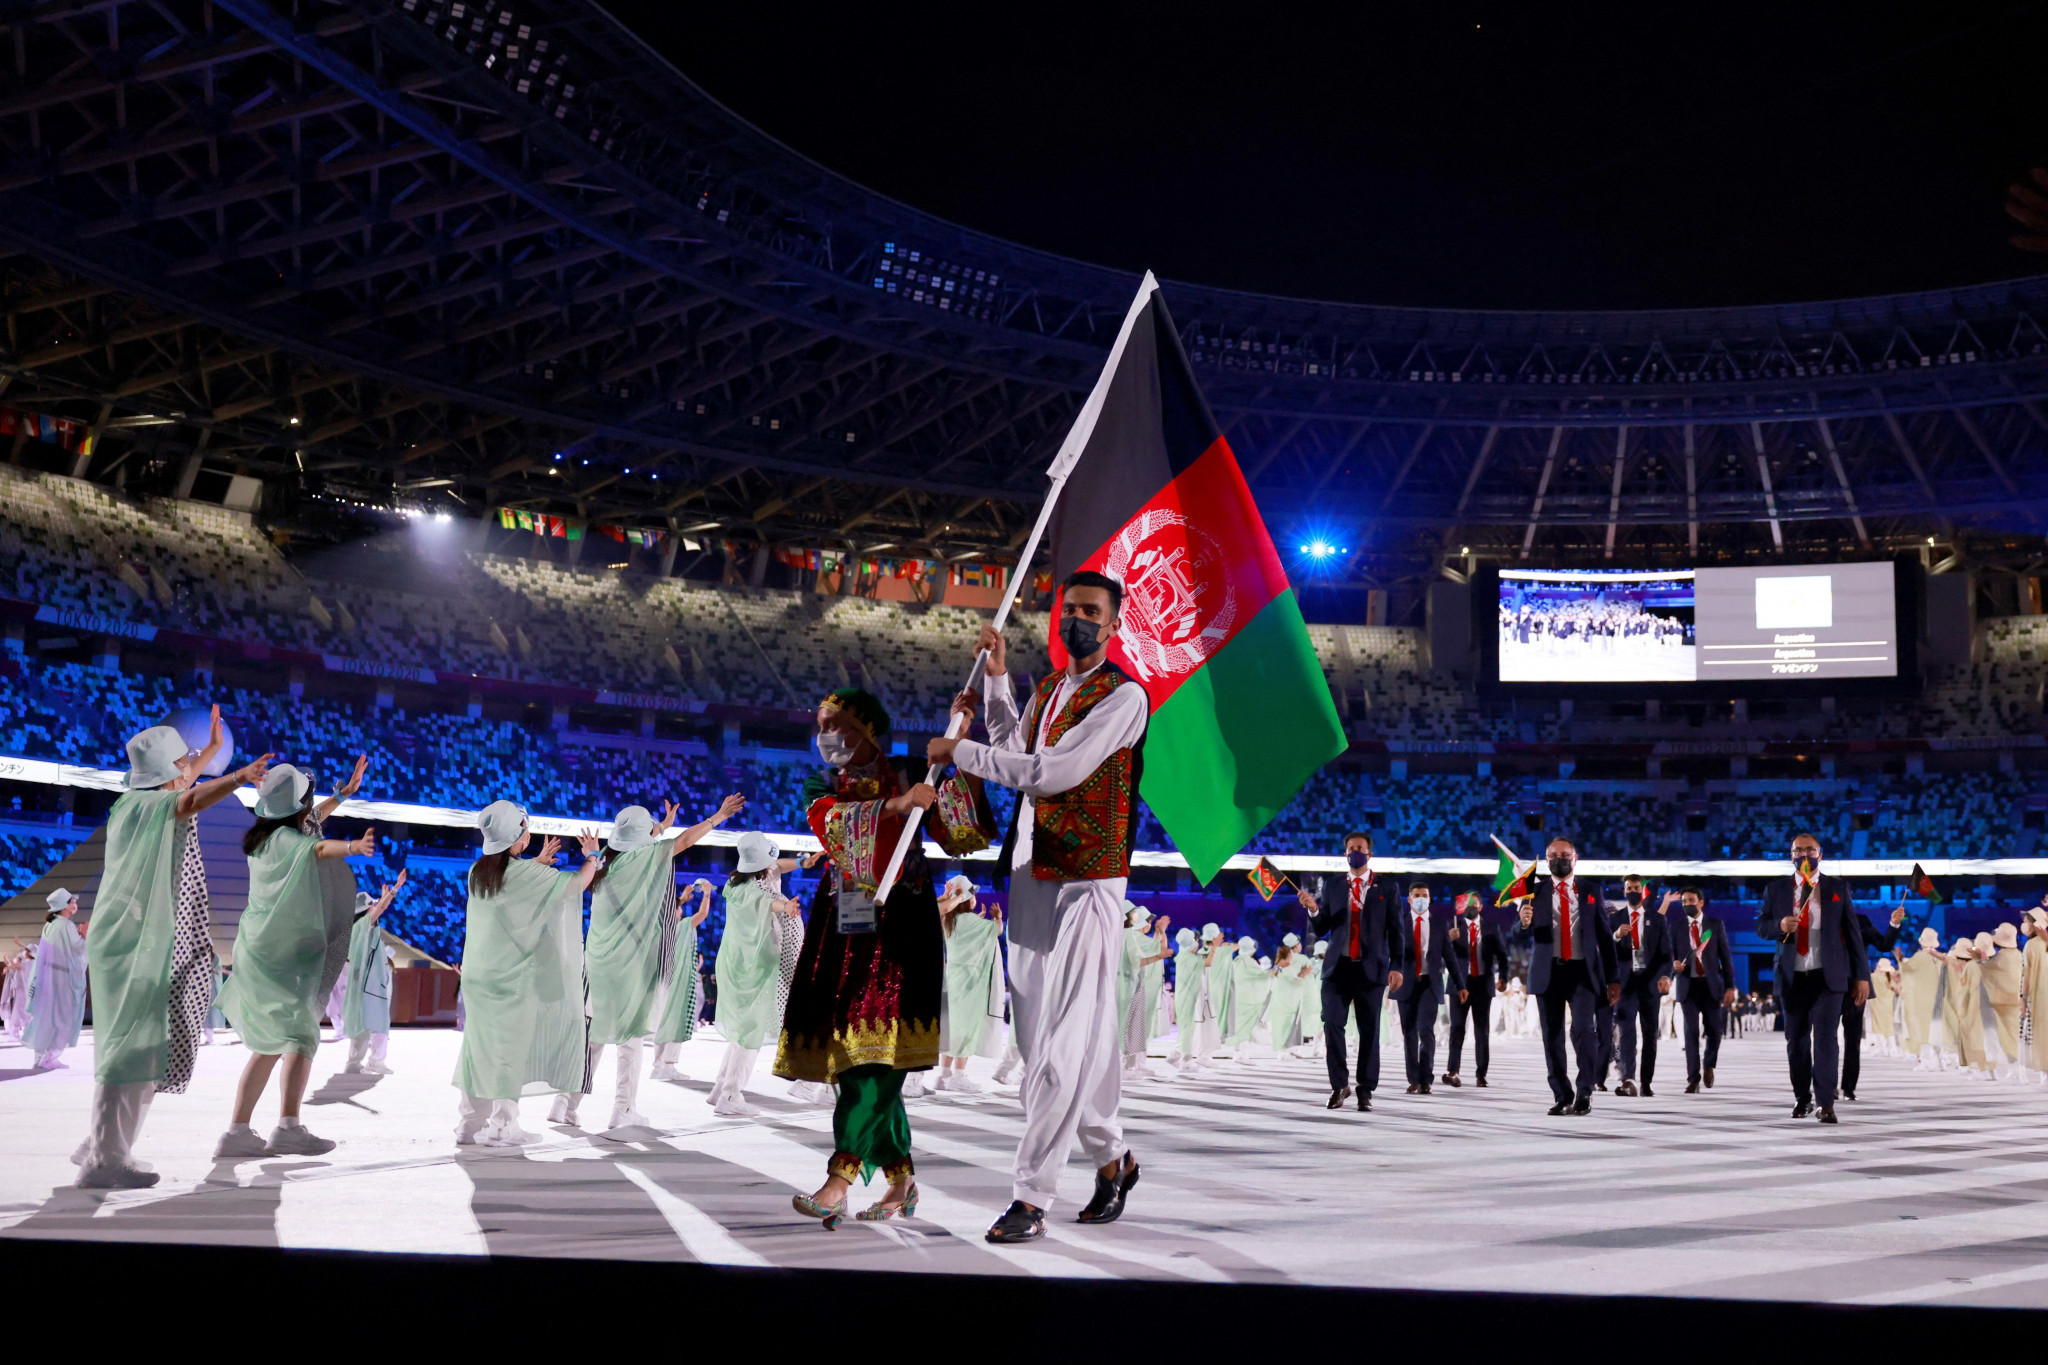 Masomah Ali Zada suggested Afghanistan could be banned from next year's Olympics if no women are allowed to represent the country ©Getty Images